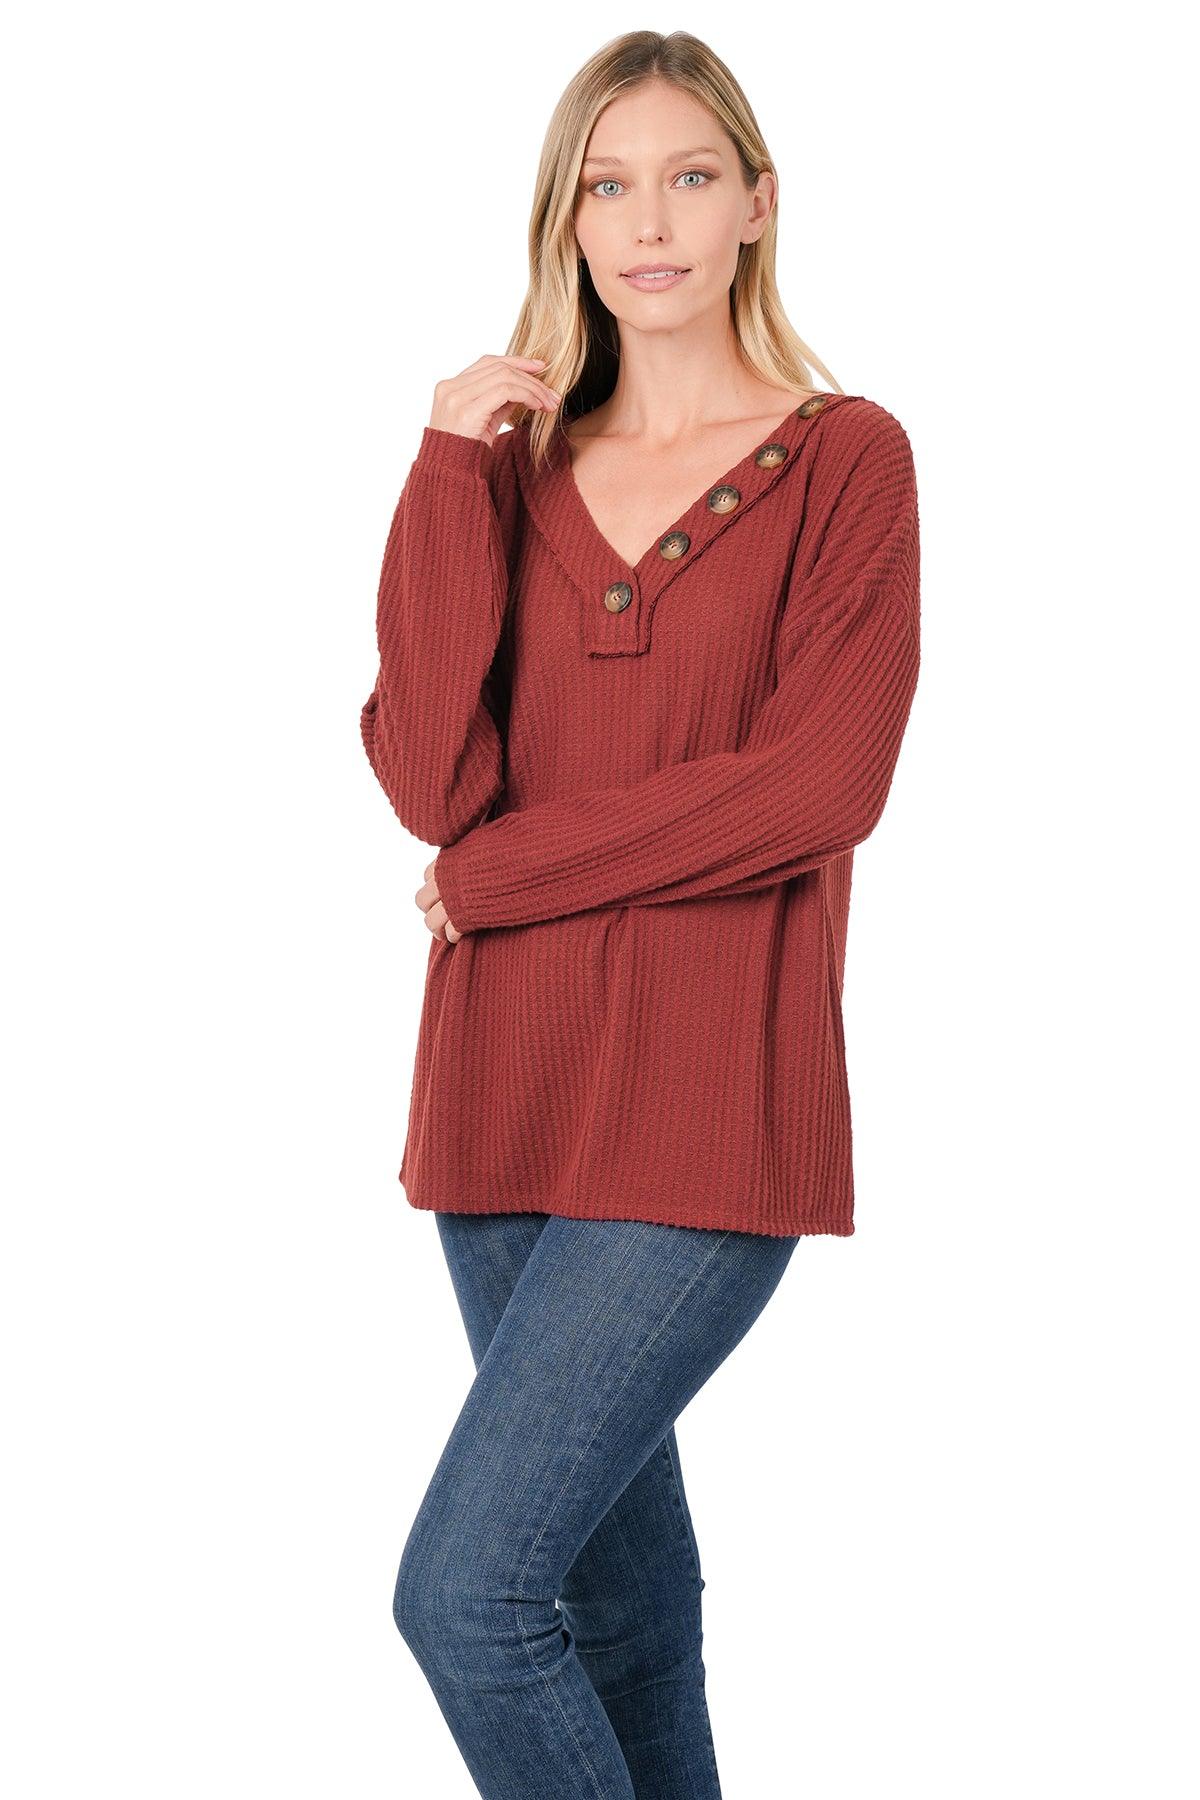 Fallin' Leaves Waffle Sweater - Lady Dorothy Boutique